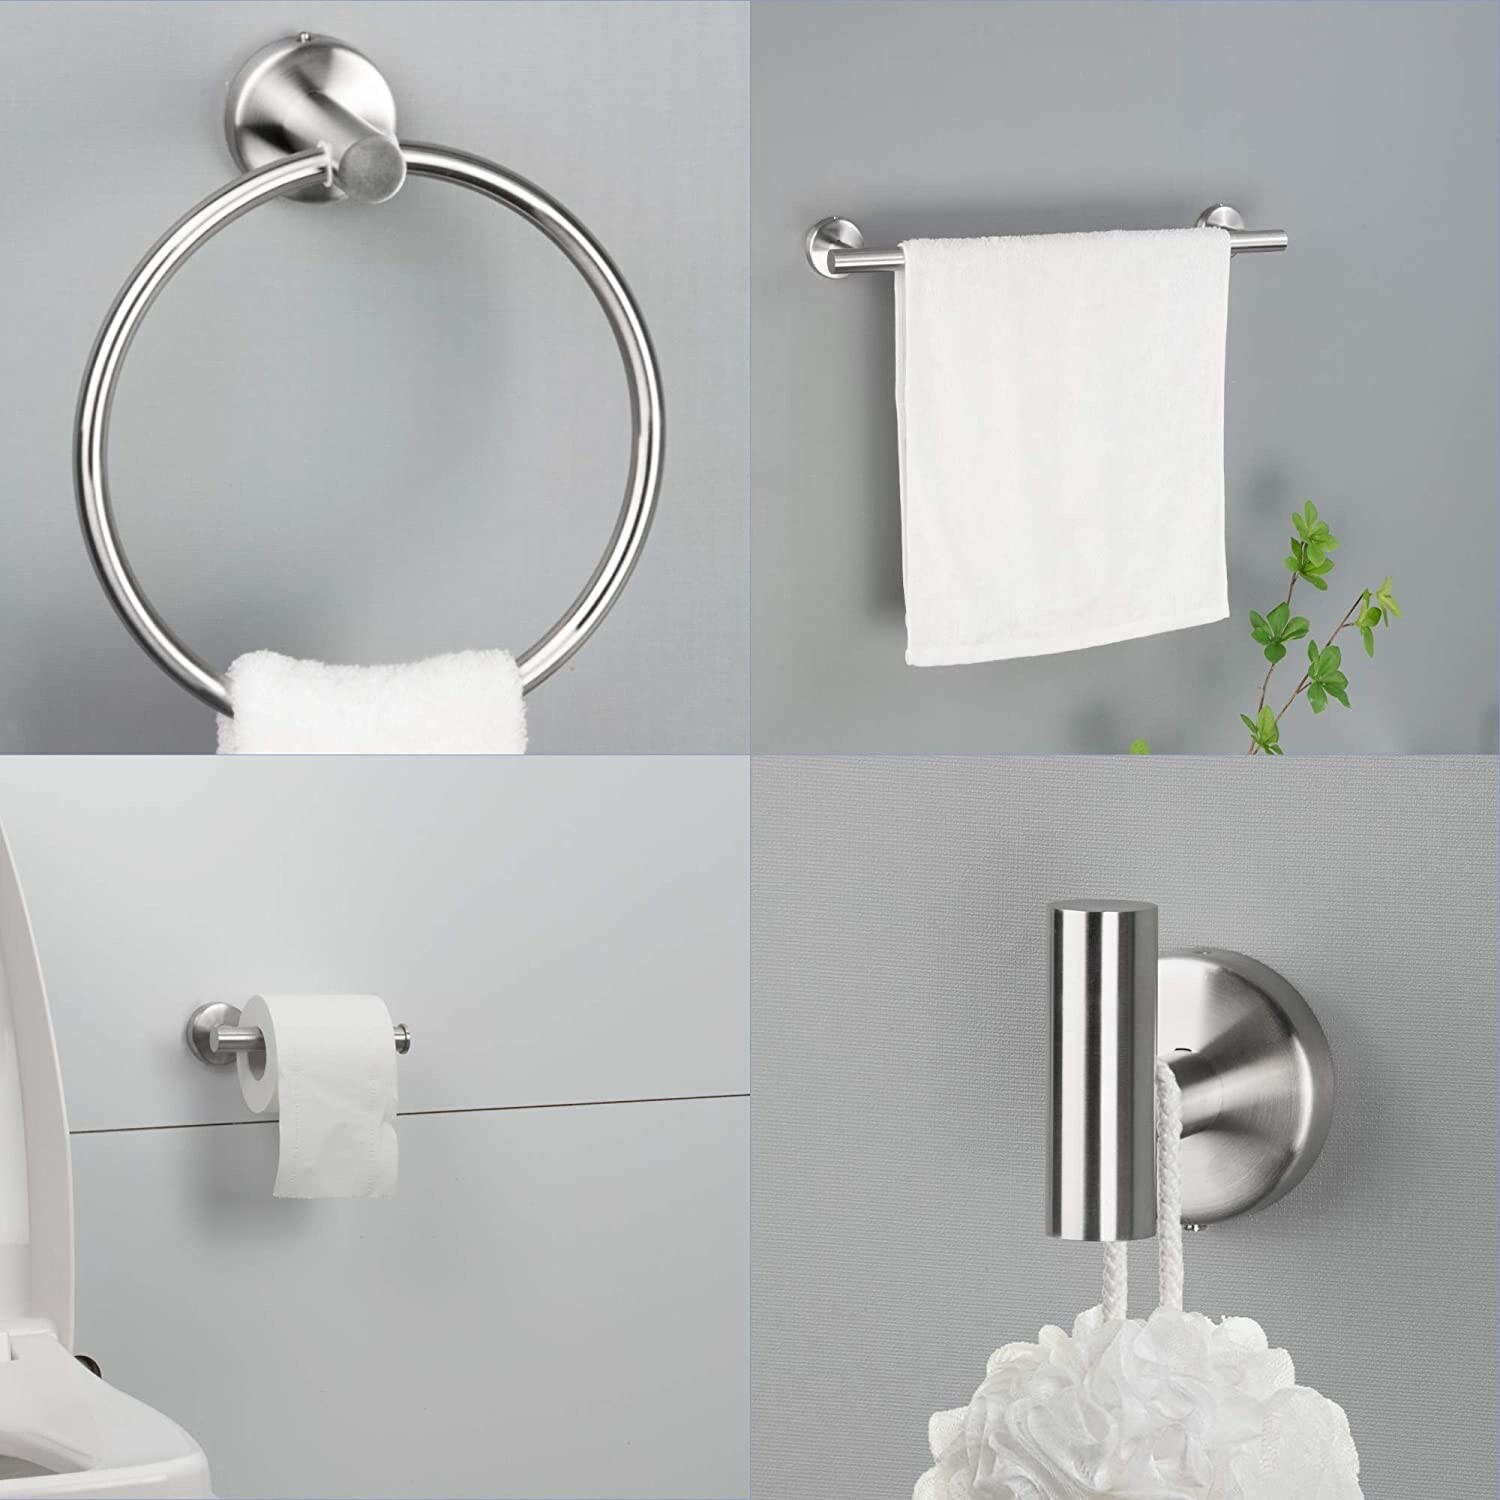 https://ak1.ostkcdn.com/images/products/is/images/direct/49c21b18c9cd746362dd85226067ad3d1b5fc77a/6-Piece-Stainless-Steel-Bathroom-Towel-Rack-Set-Wall-Mount-Silver.jpg